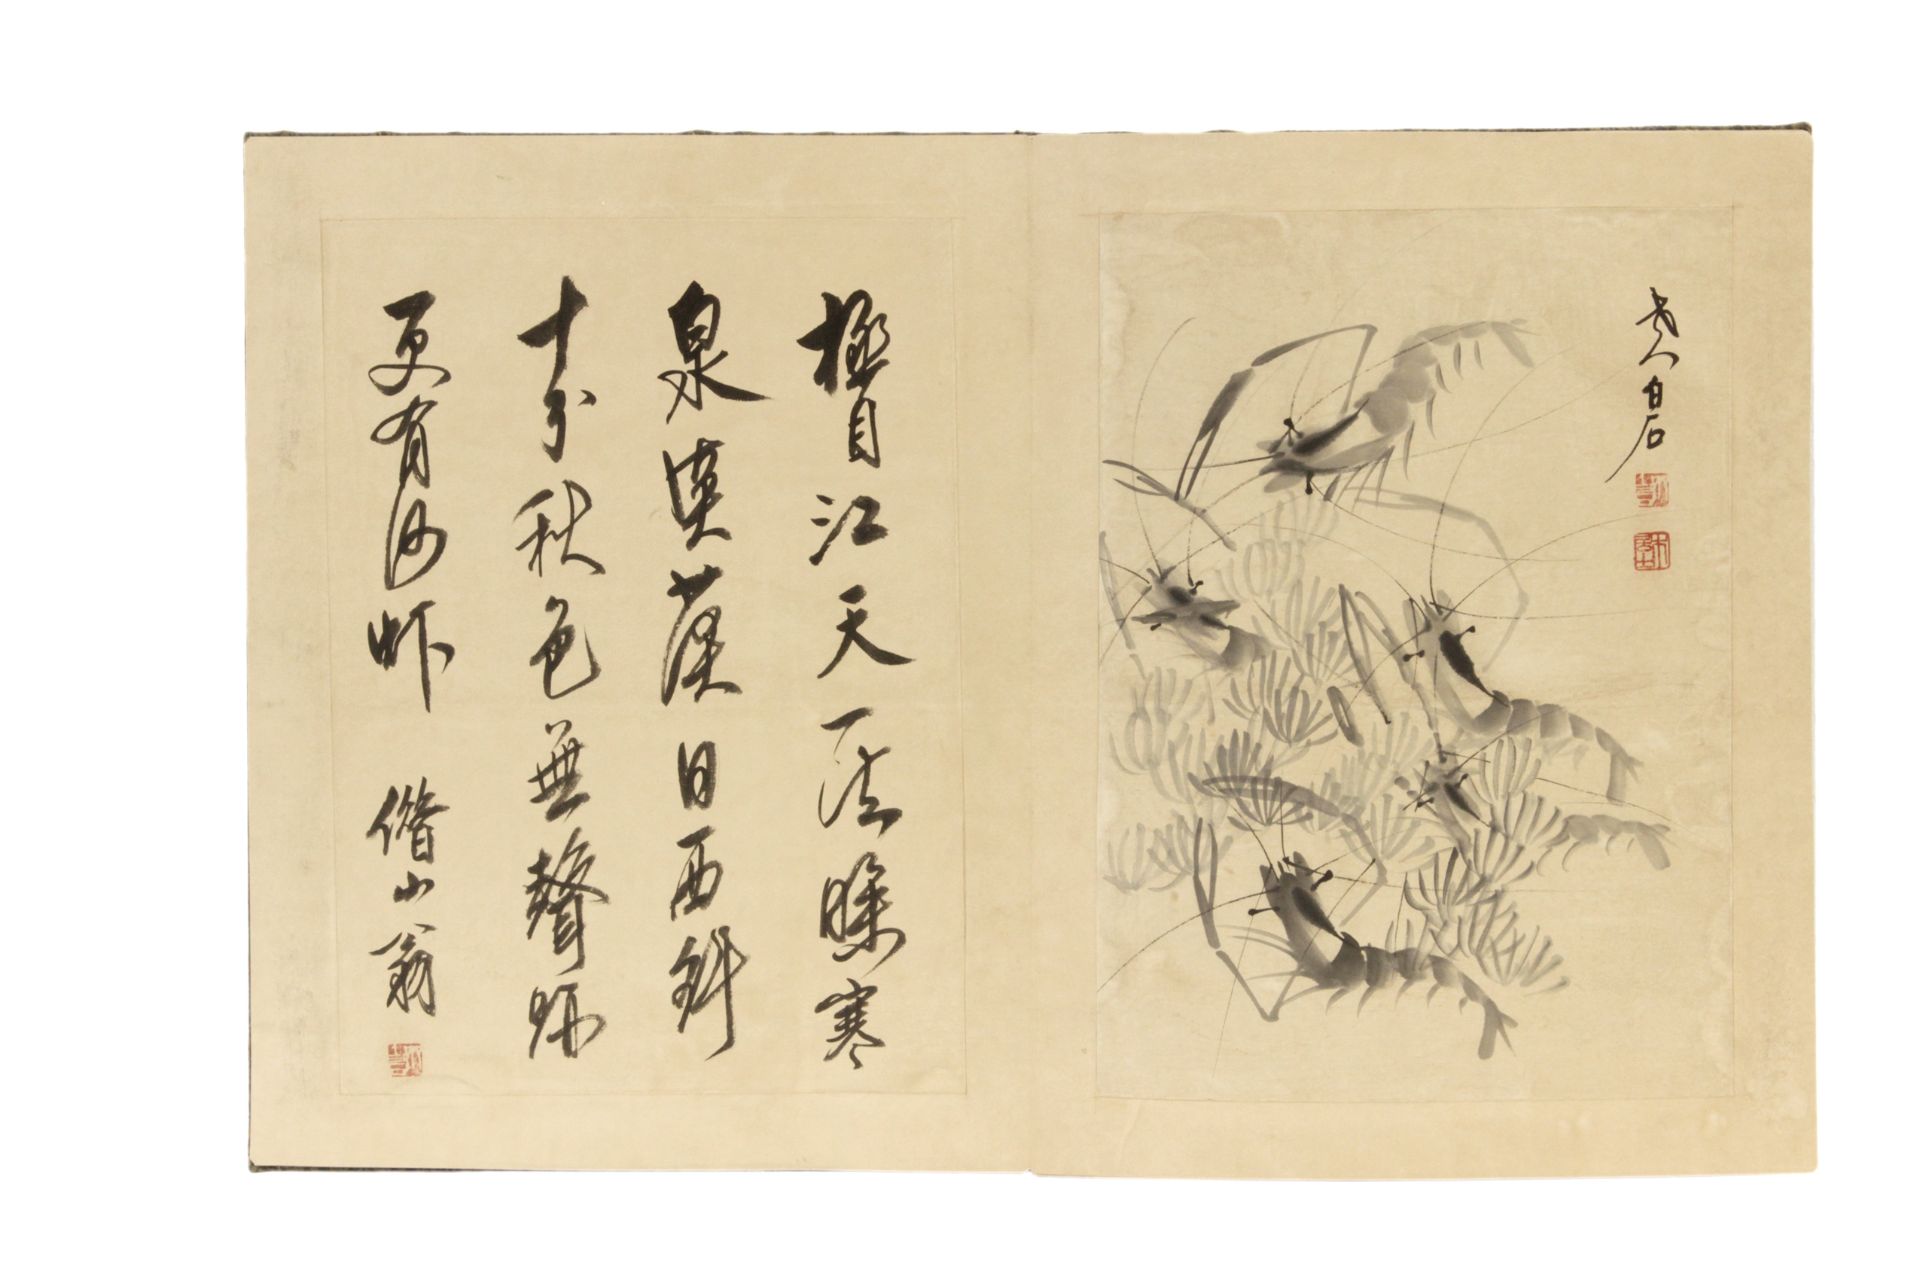 A 20th century Chinese sketches and poems album - Image 2 of 8